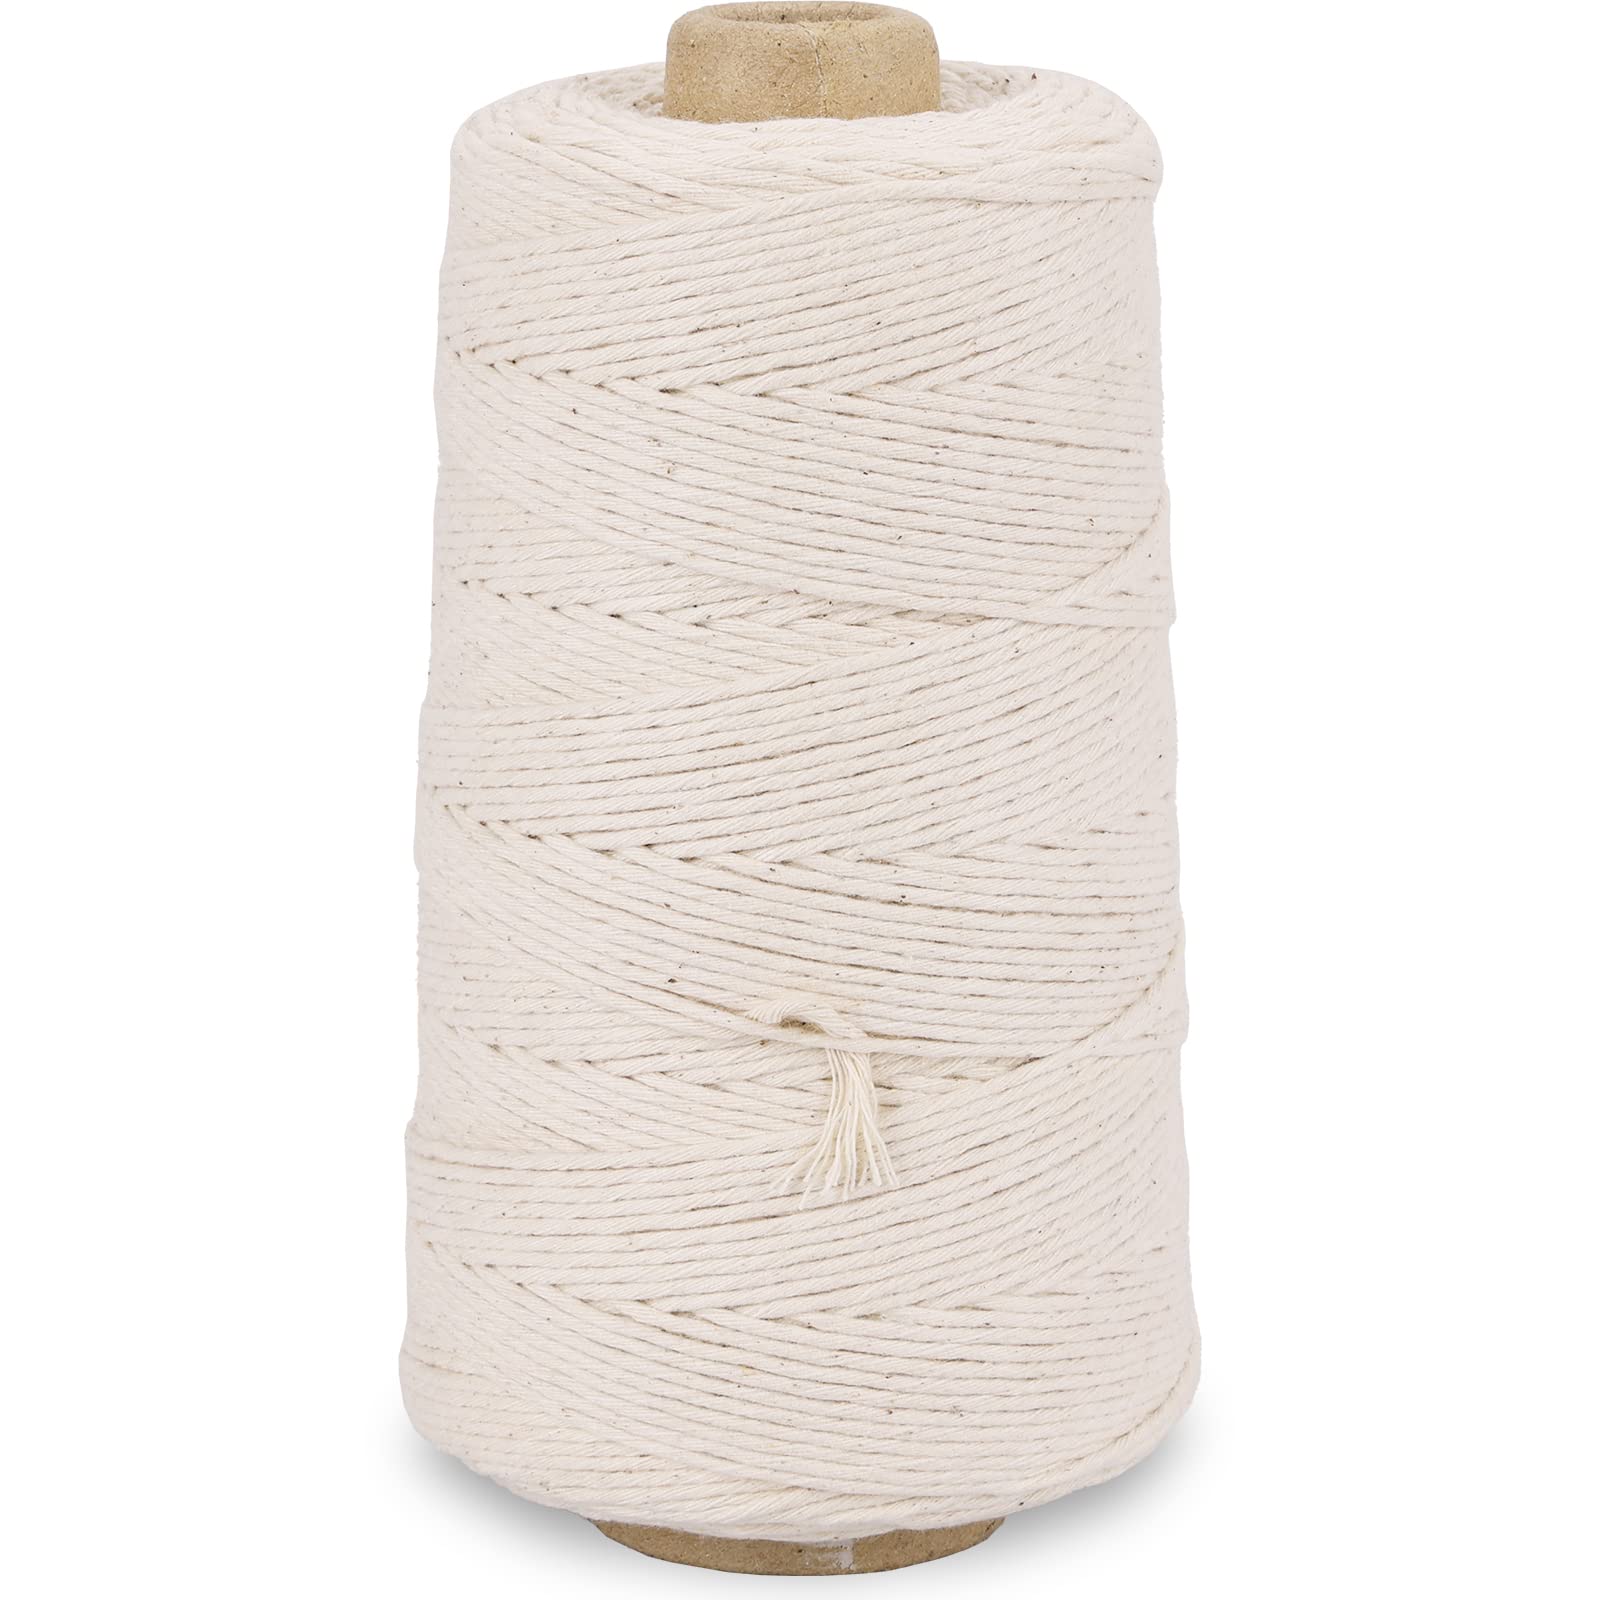 XKDOUS 952ft Butchers Twine, 100% Cotton Food Safe Cooking Twine Kitchen  Twine String, 2mm Natural White Butcher Twine for Meat and Roasting,  Trussing